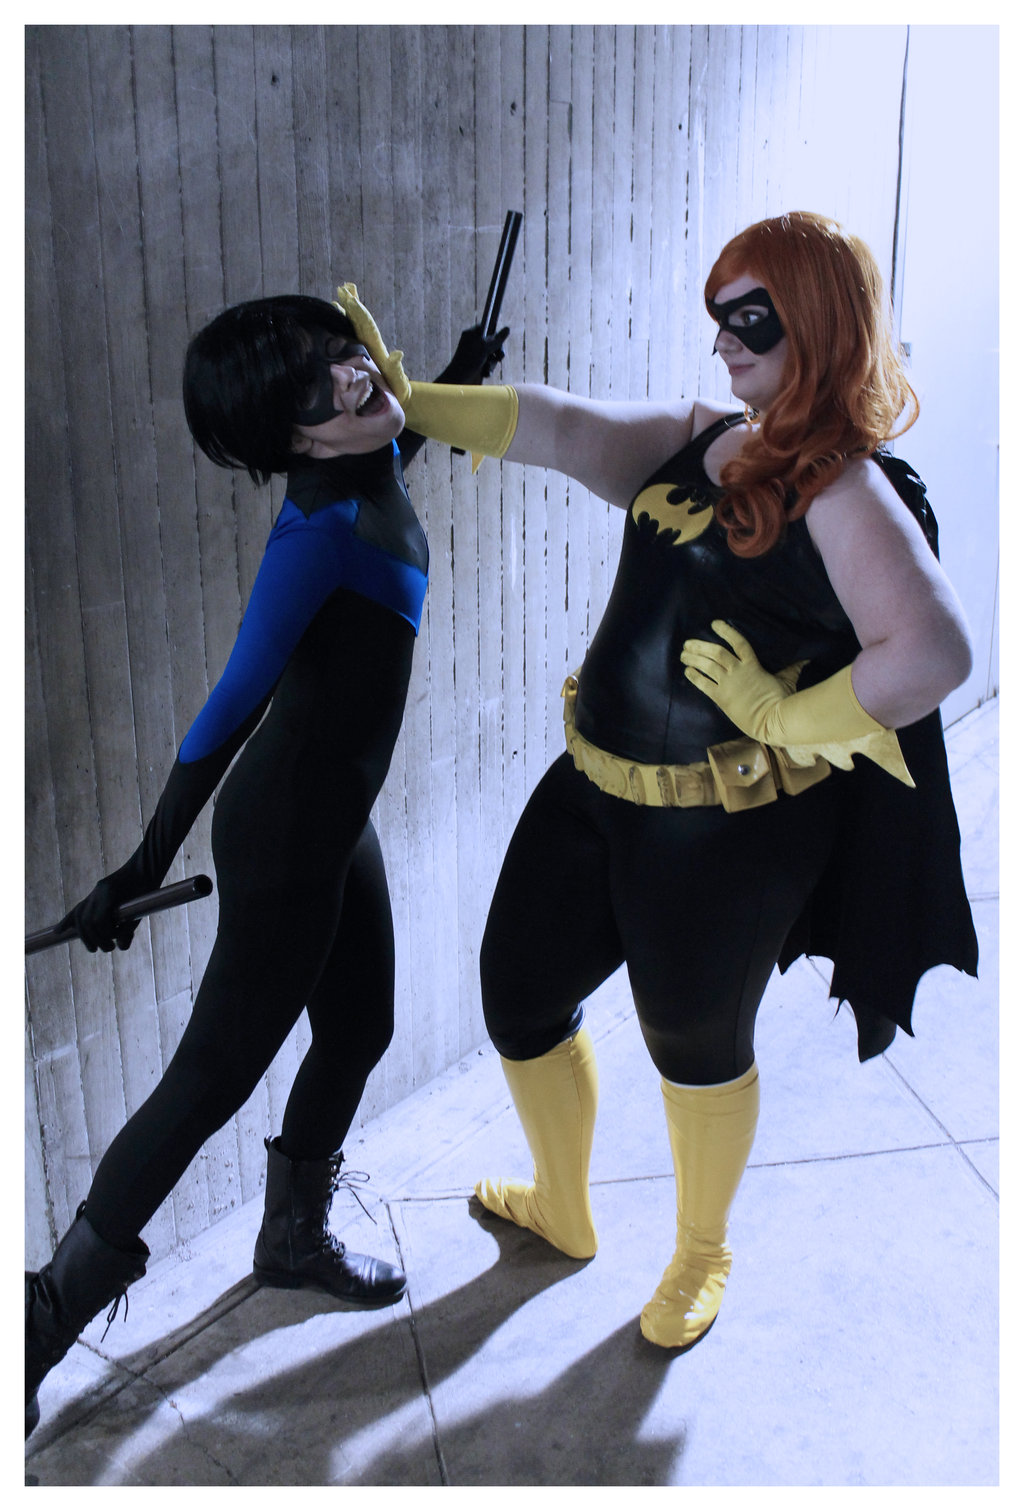 Nightwing and Batgirl by rizzapiff